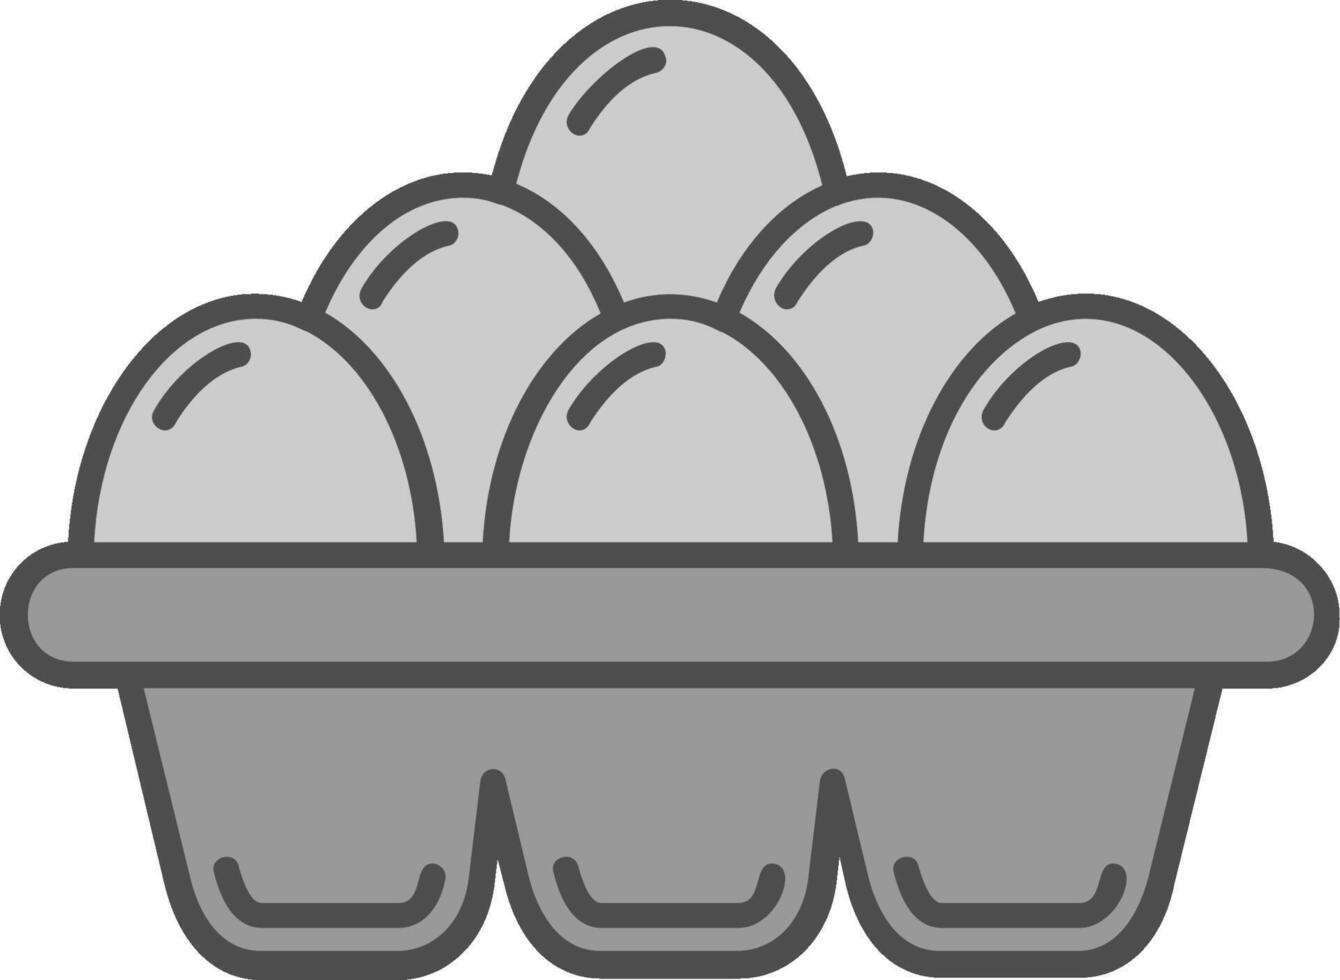 Eggs Line Filled Greyscale Icon vector